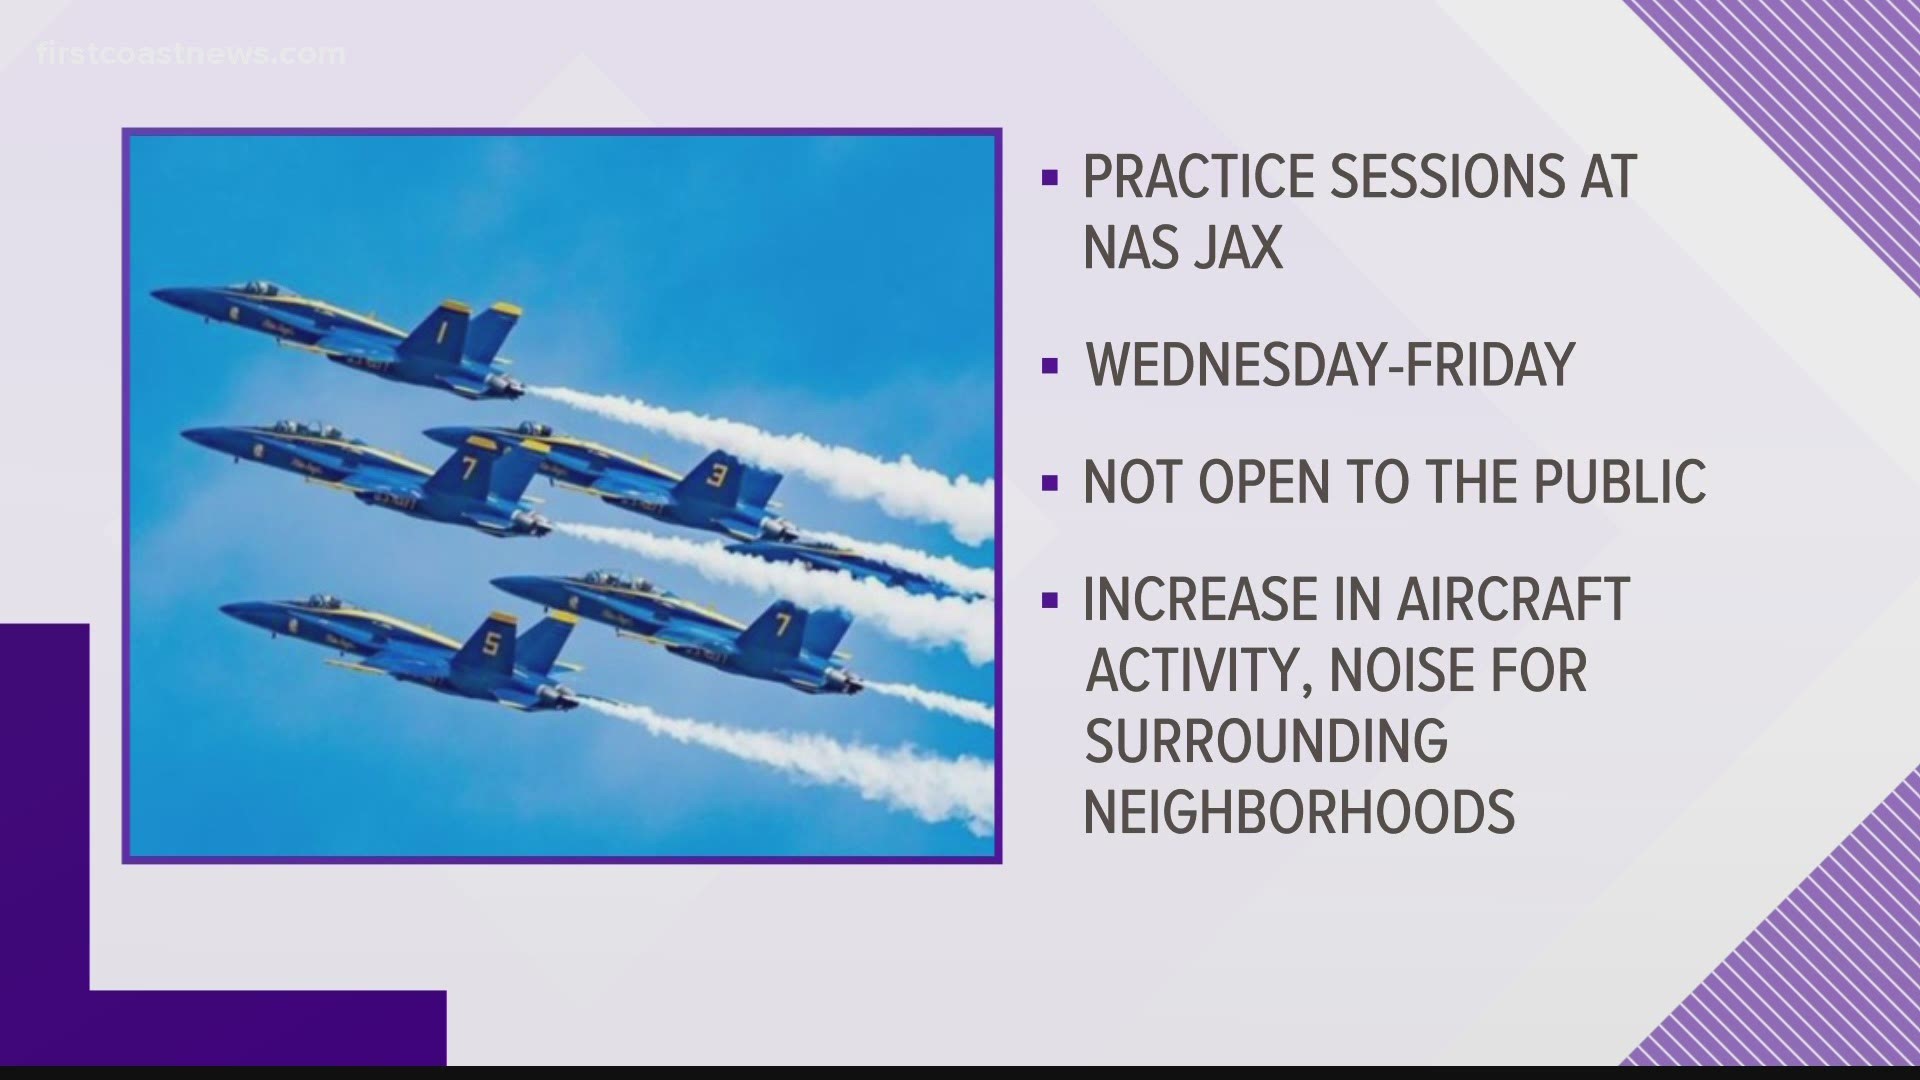 The practice sessions will take place beginning Wednesday and will continue through Friday. However, the base will not be open to the public for viewing.